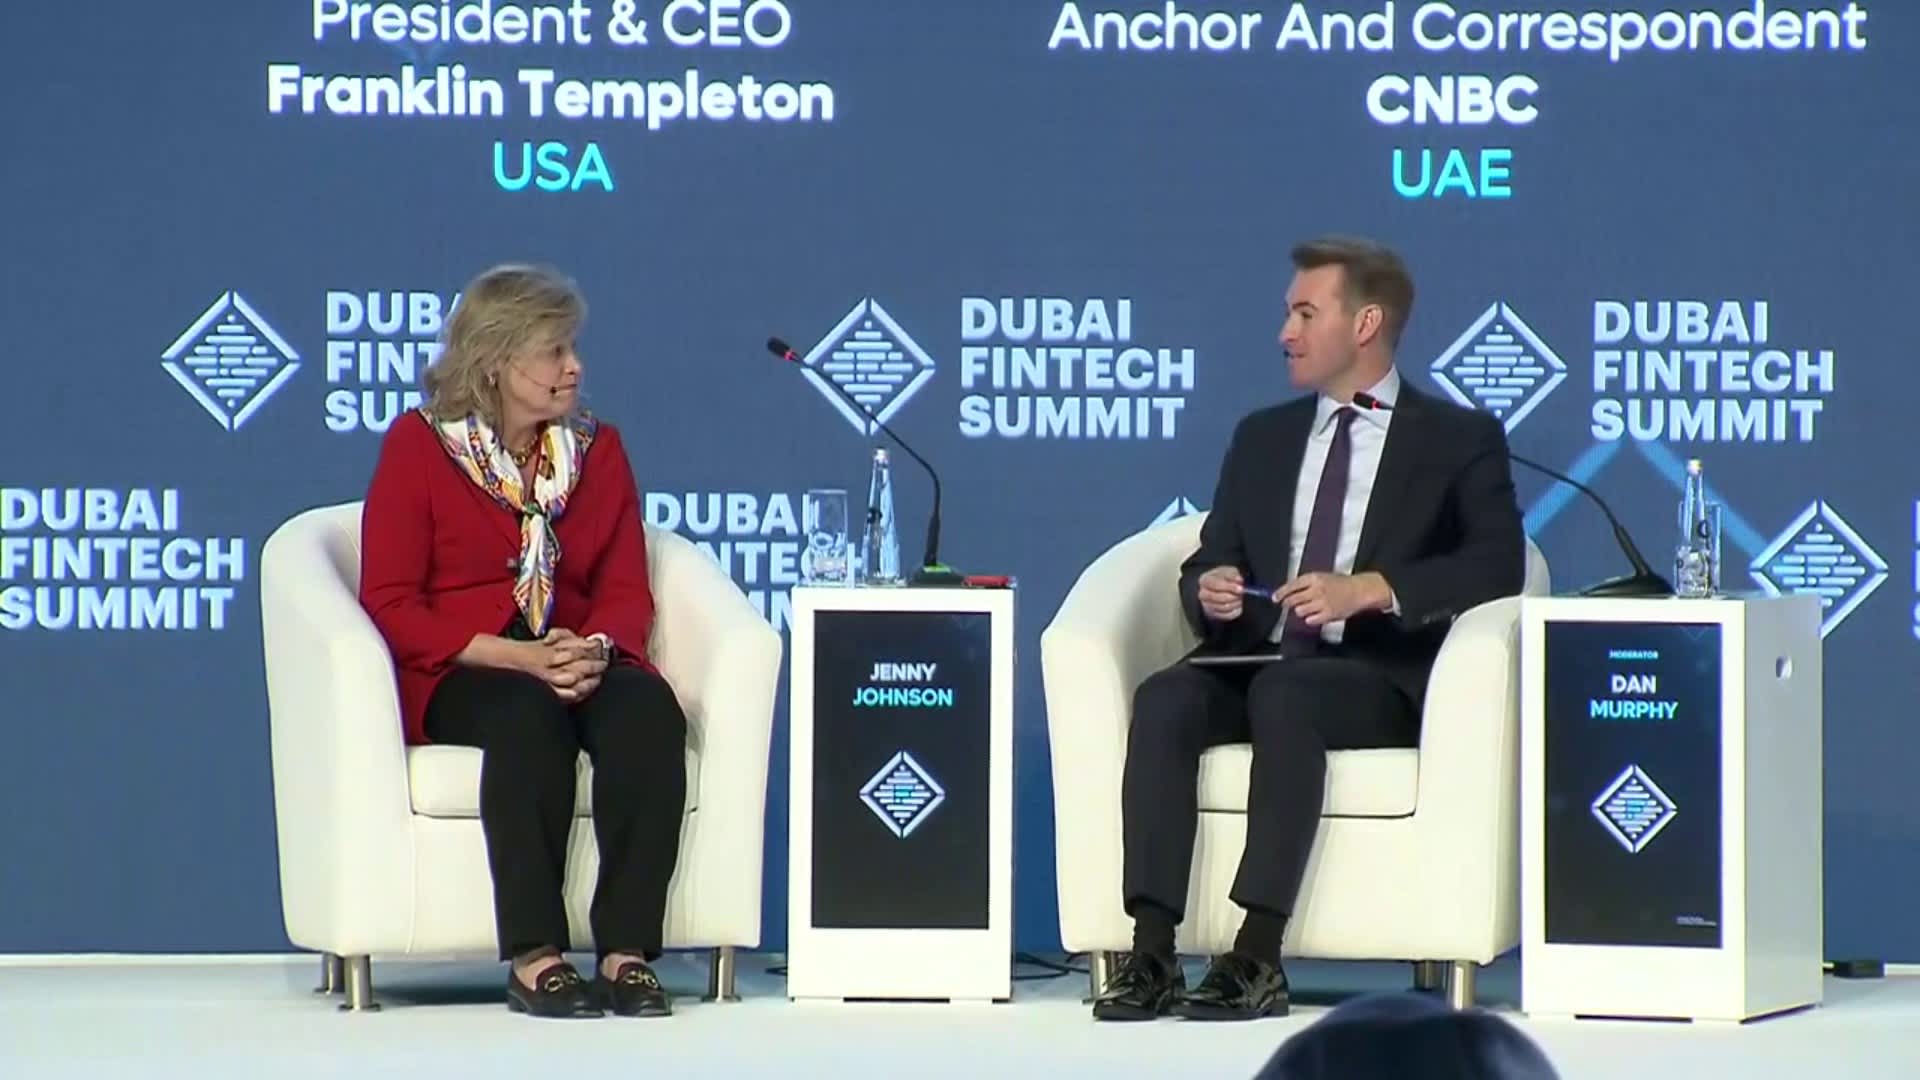 A.I. and blockchain will be the 2 biggest 'disruptors' to any industry, says Franklin Templeton CEO